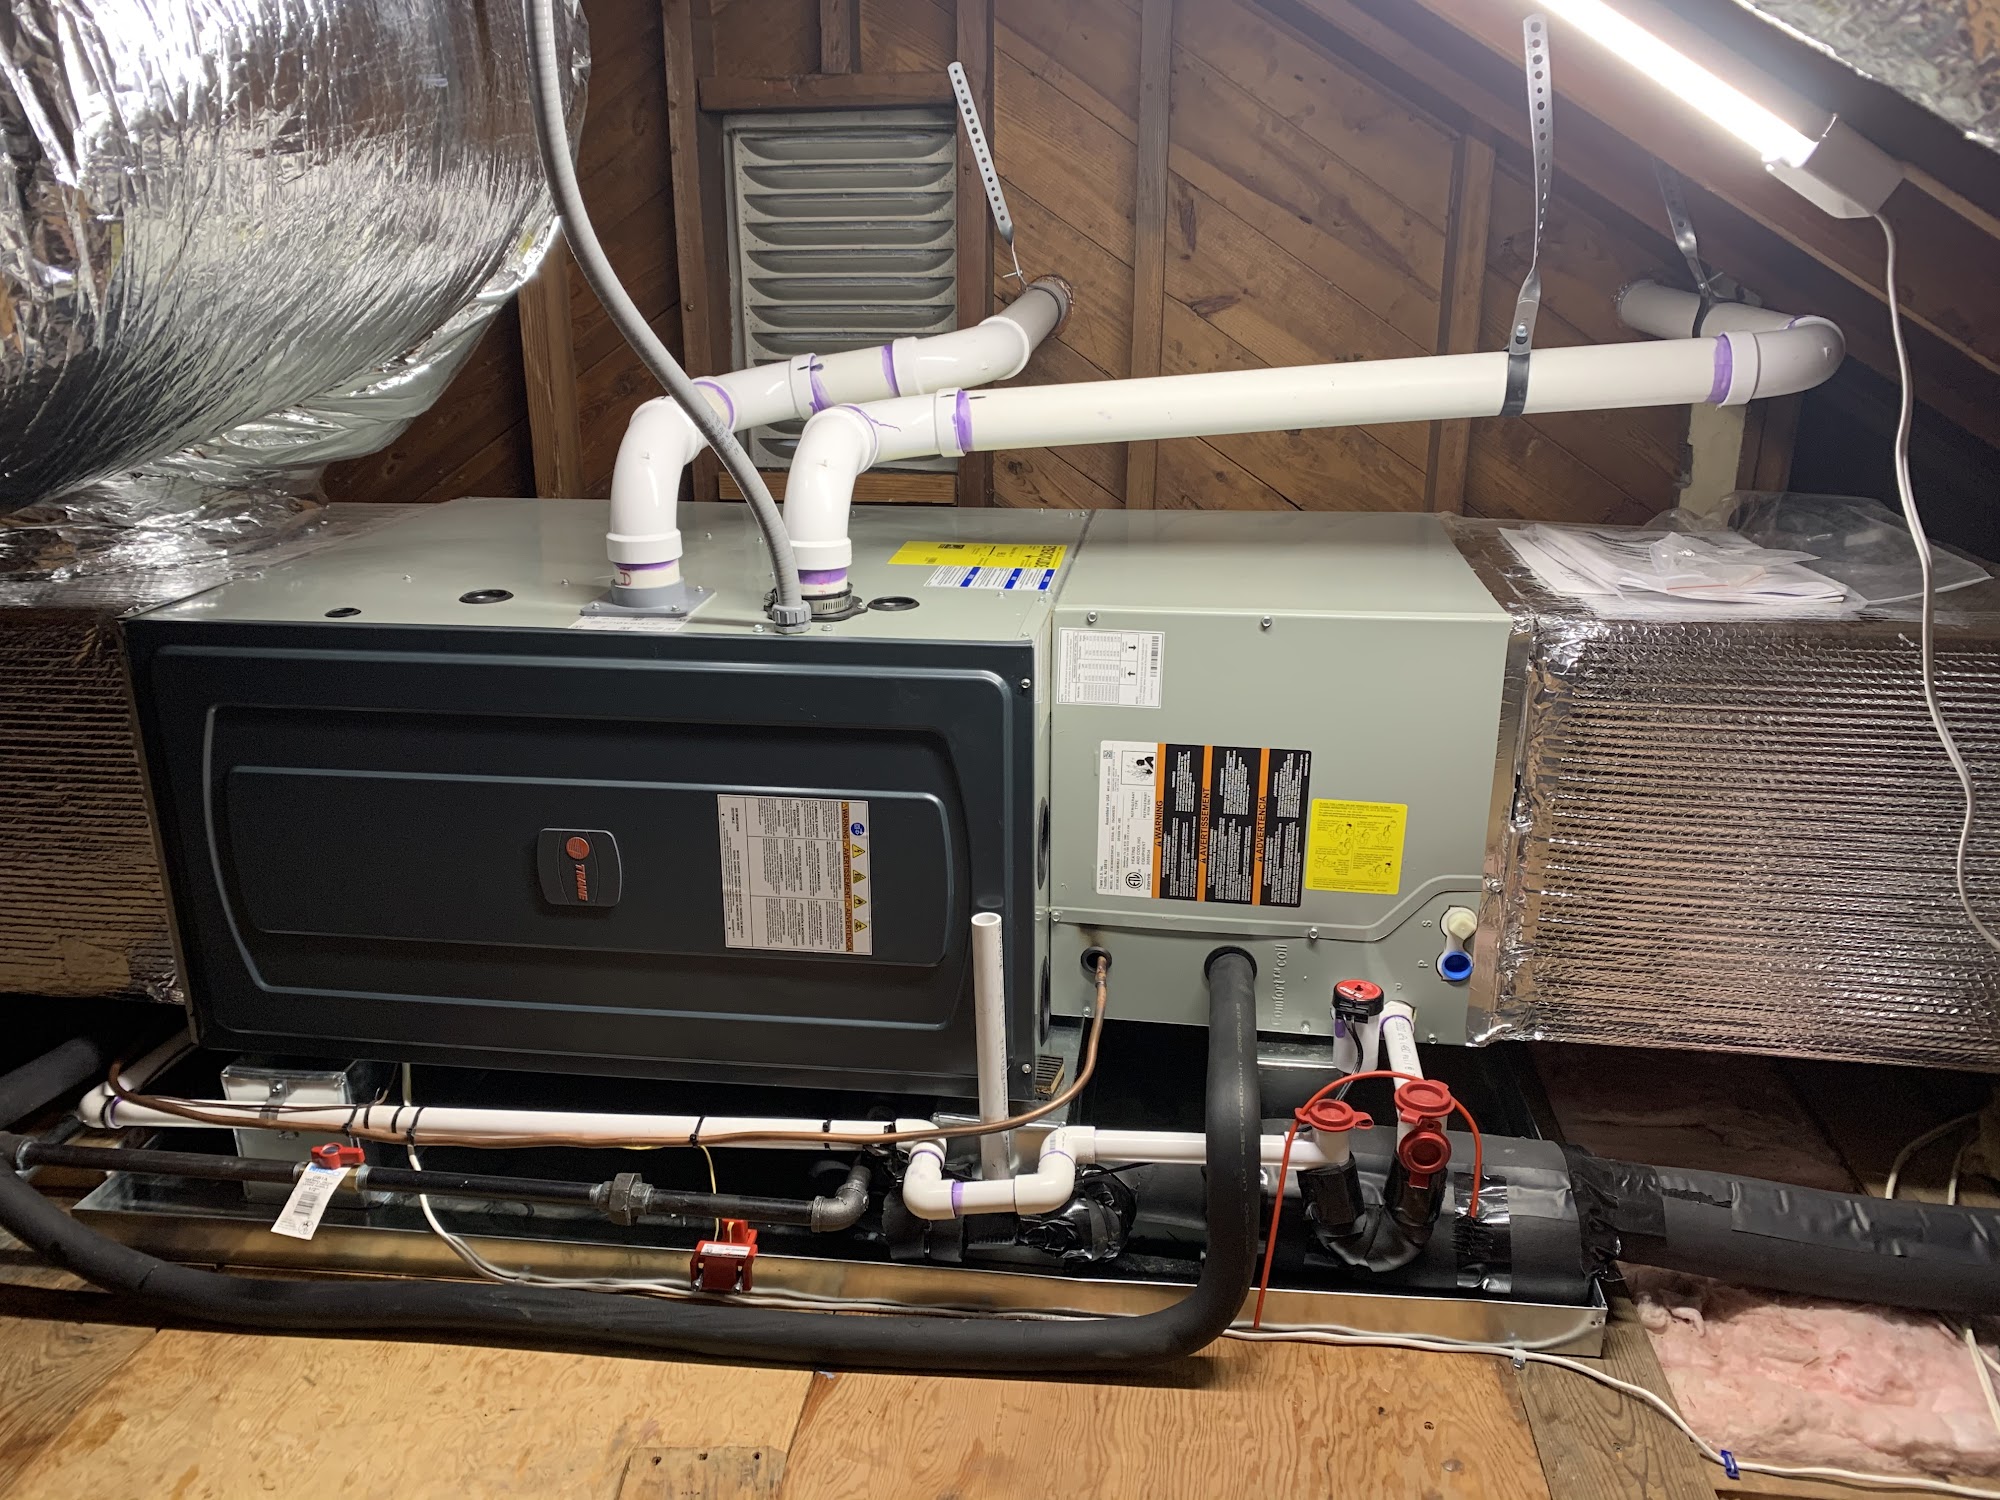 American Eagle Heating and Air Conditioning of NJ Inc